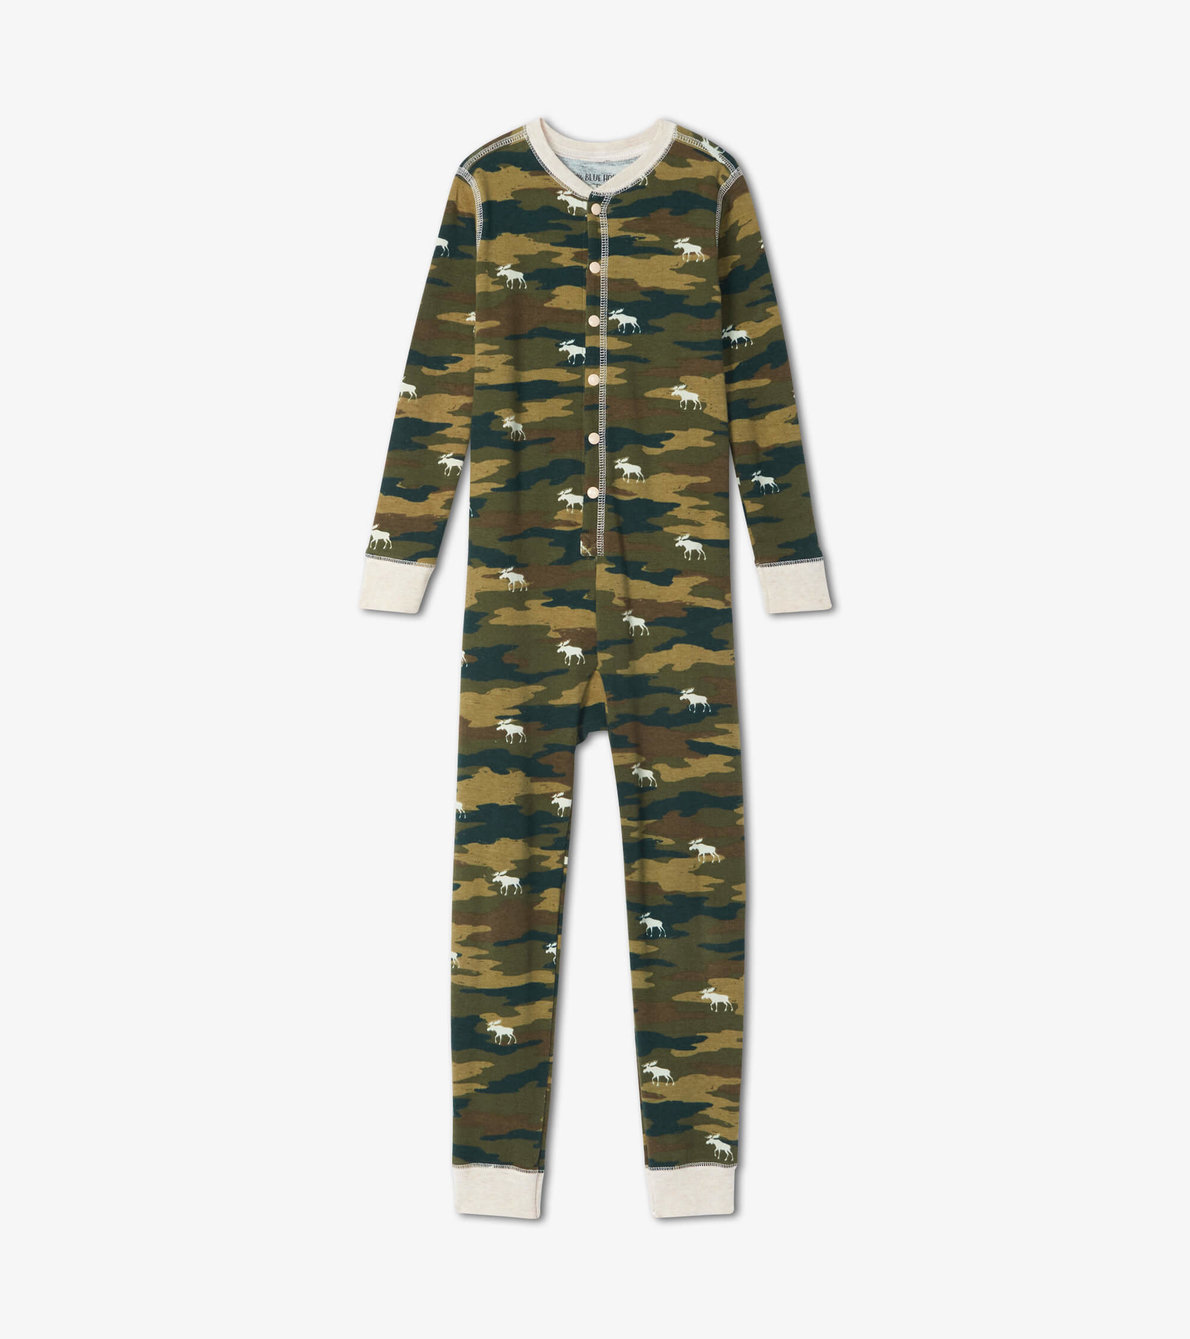 View larger image of Camooseflage Kids Union Suit